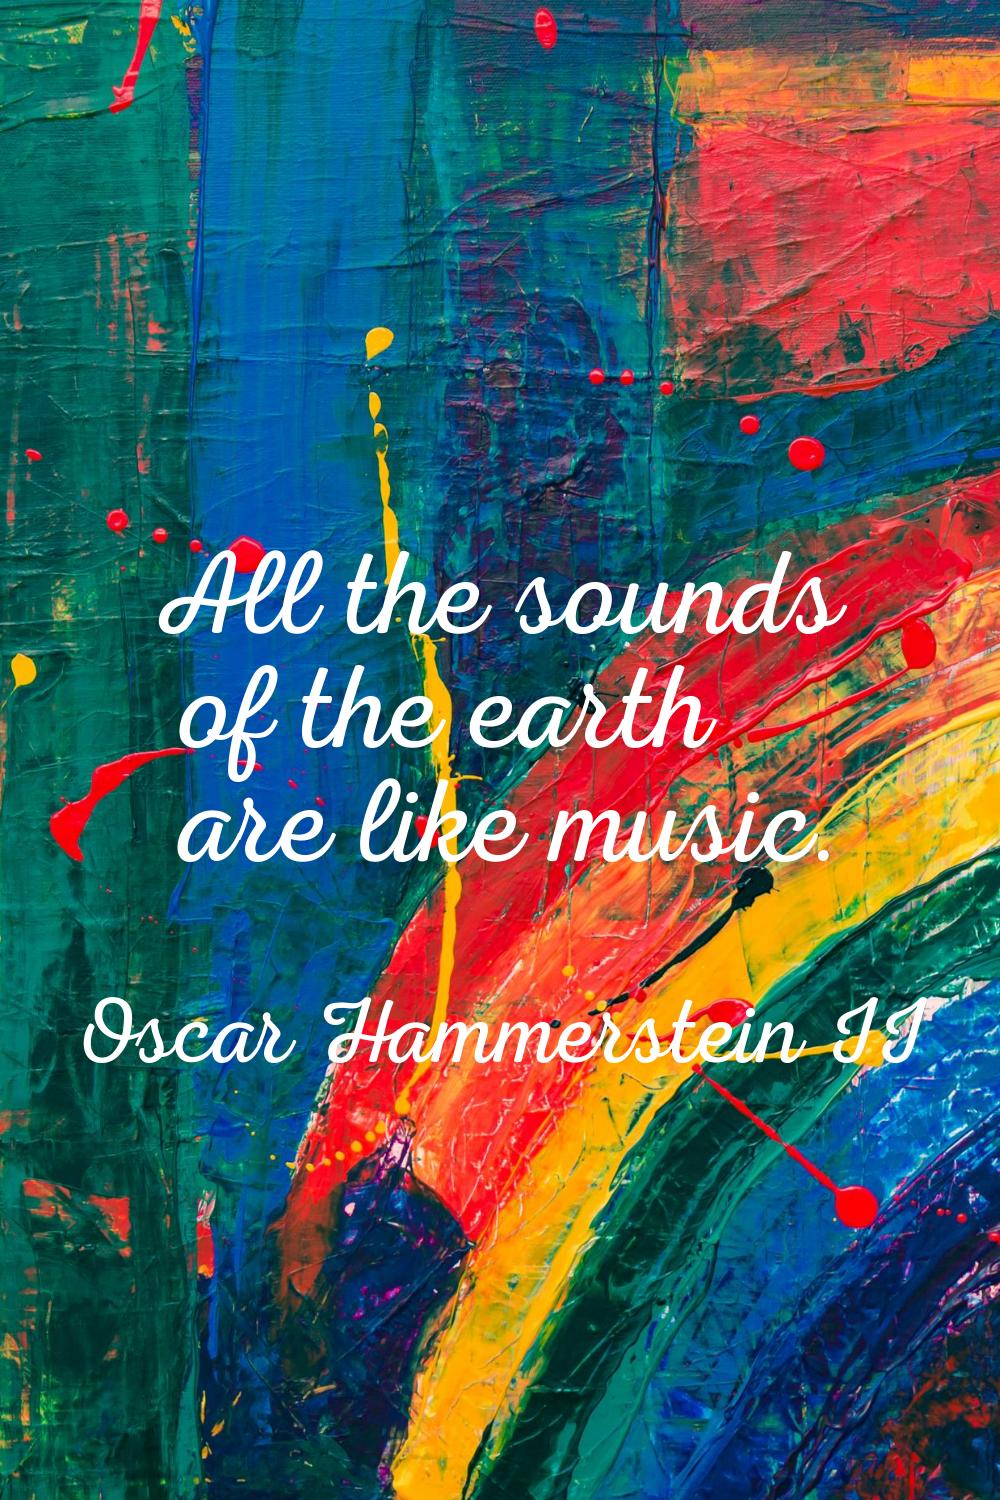 All the sounds of the earth are like music.